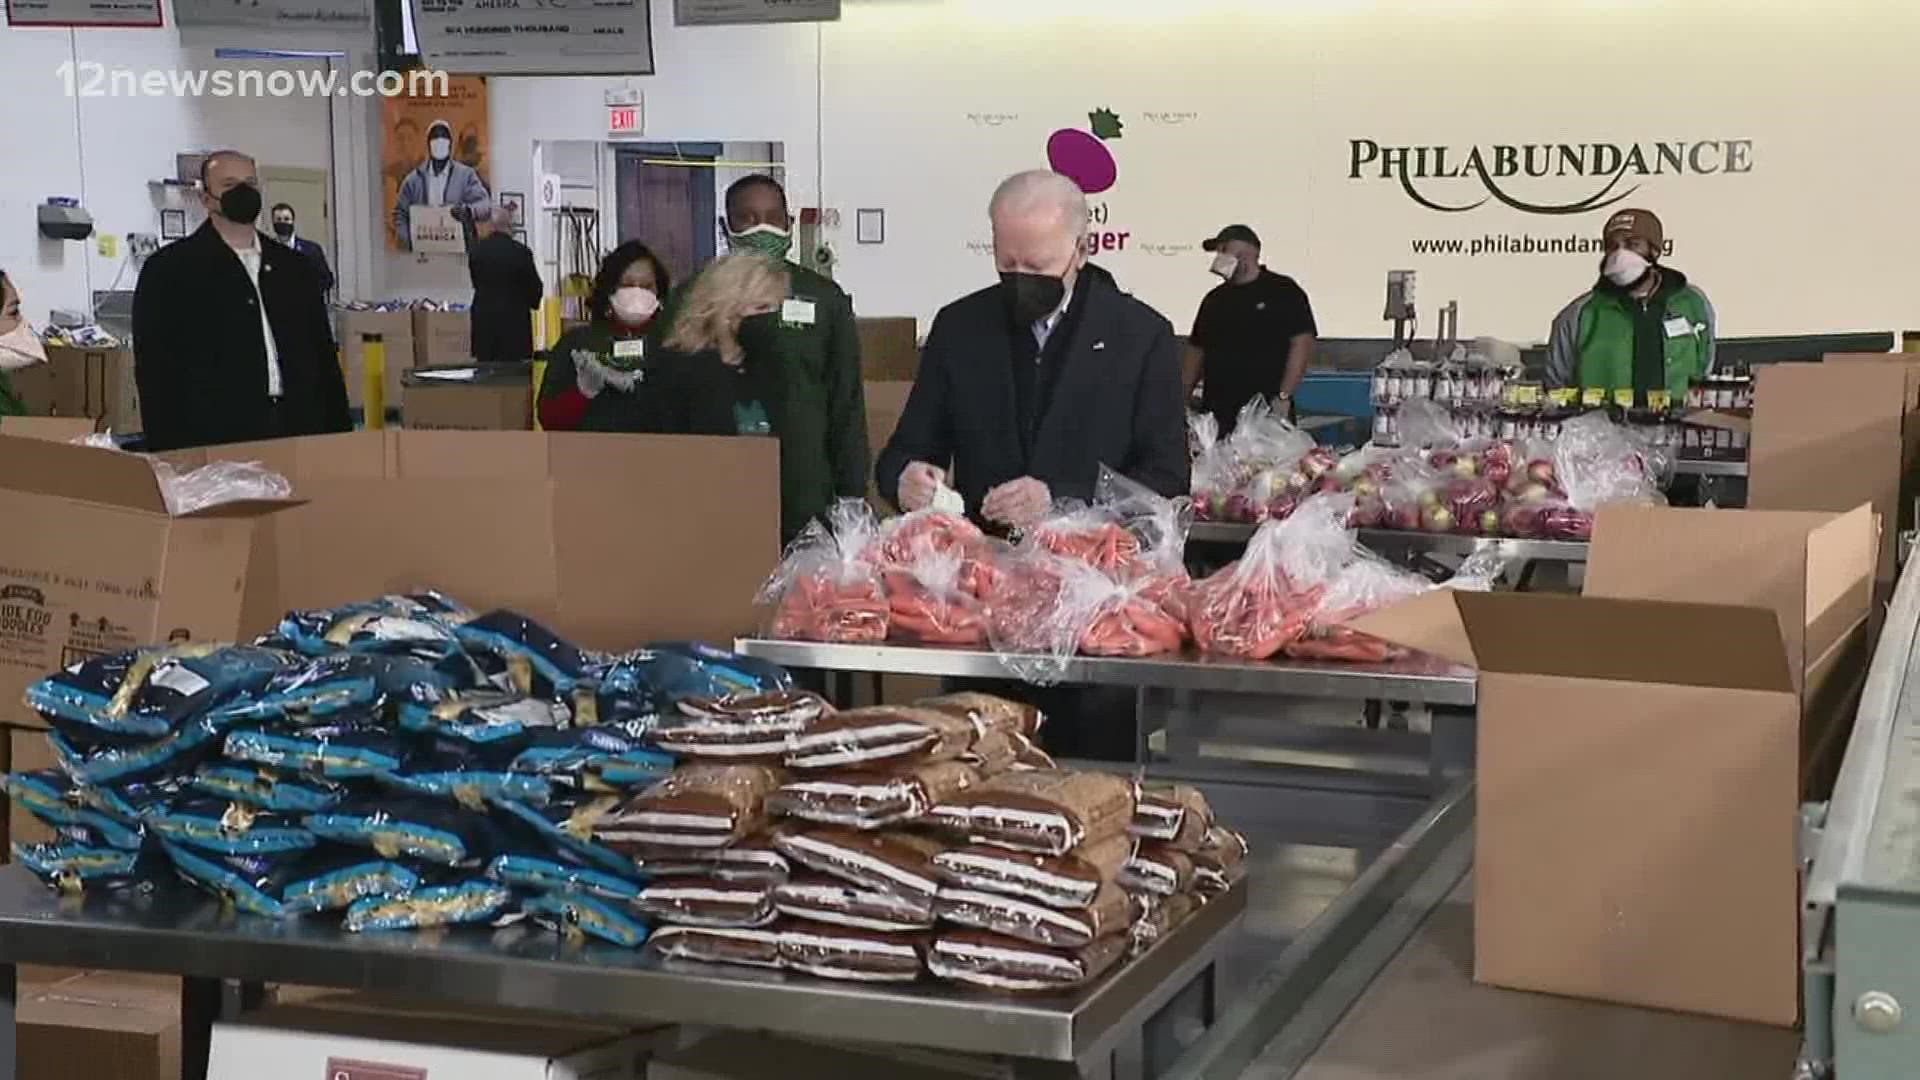 The Biden's helped pack boxes for a hunger relief organization.